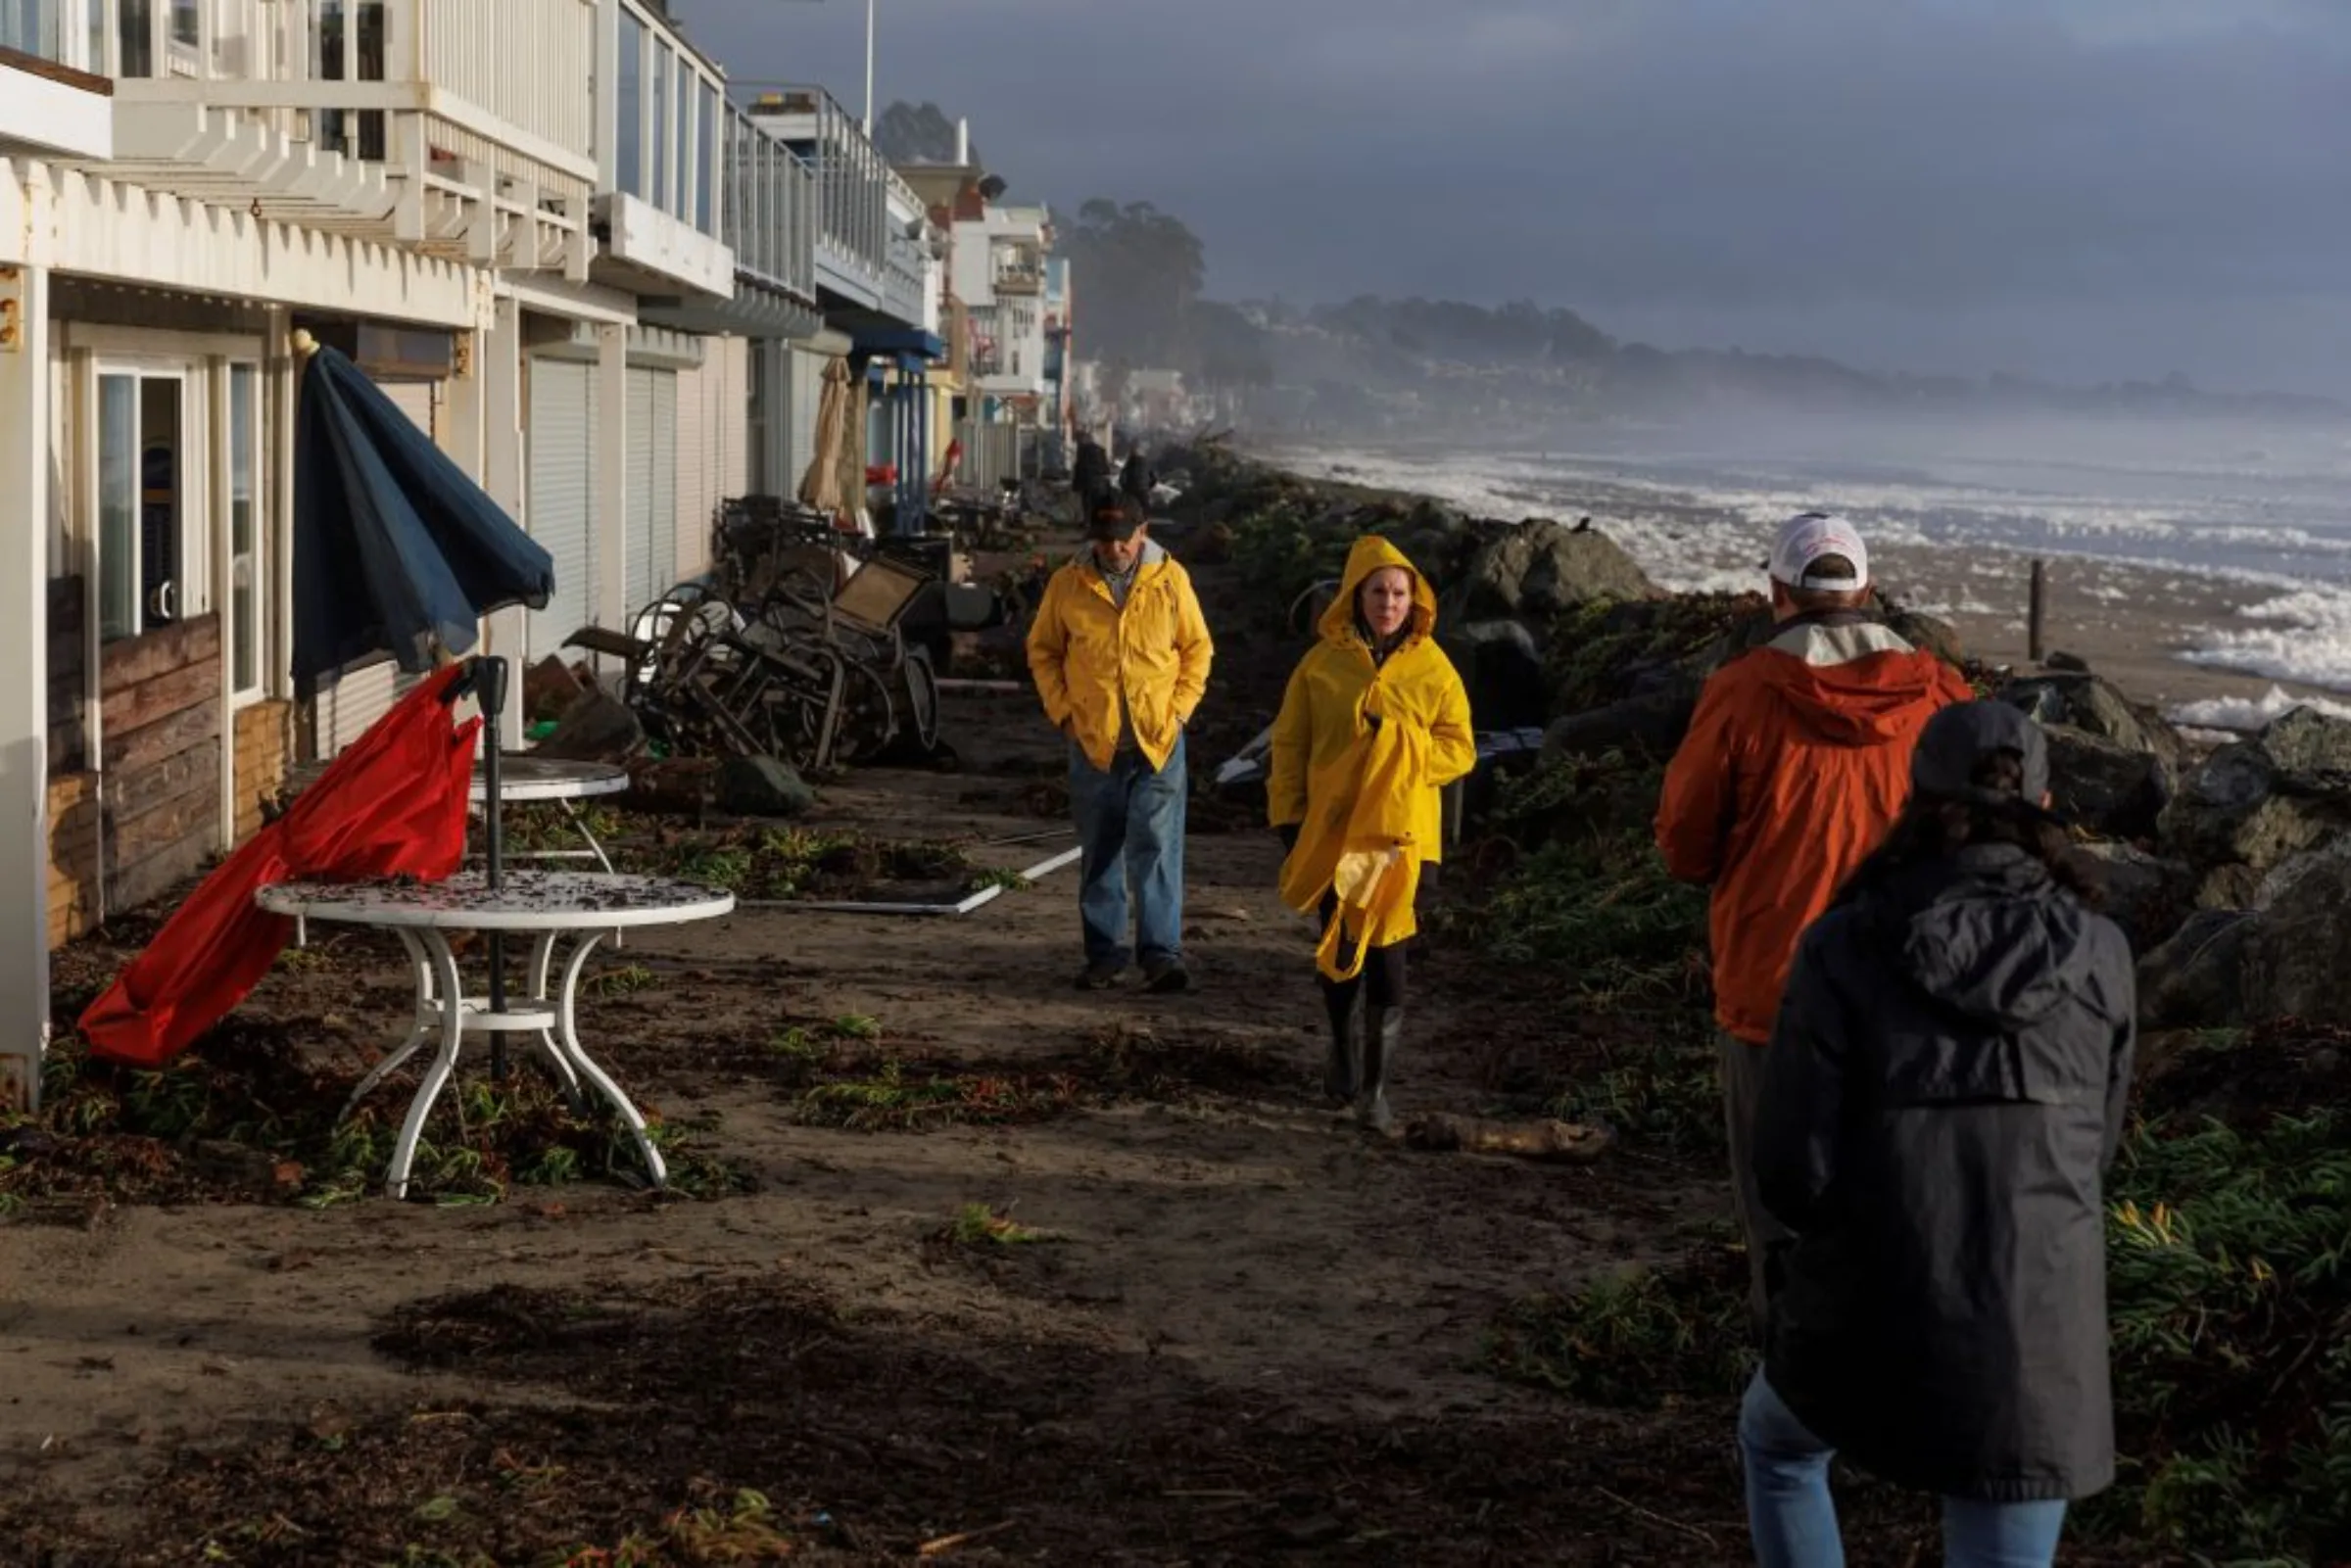 Residents walk along coastal front properties damaged after 'atmospheric river' rainstorms slammed northern California, in the town of Aptos, U.S., January 5, 2023. REUTERS/Carlos Barria